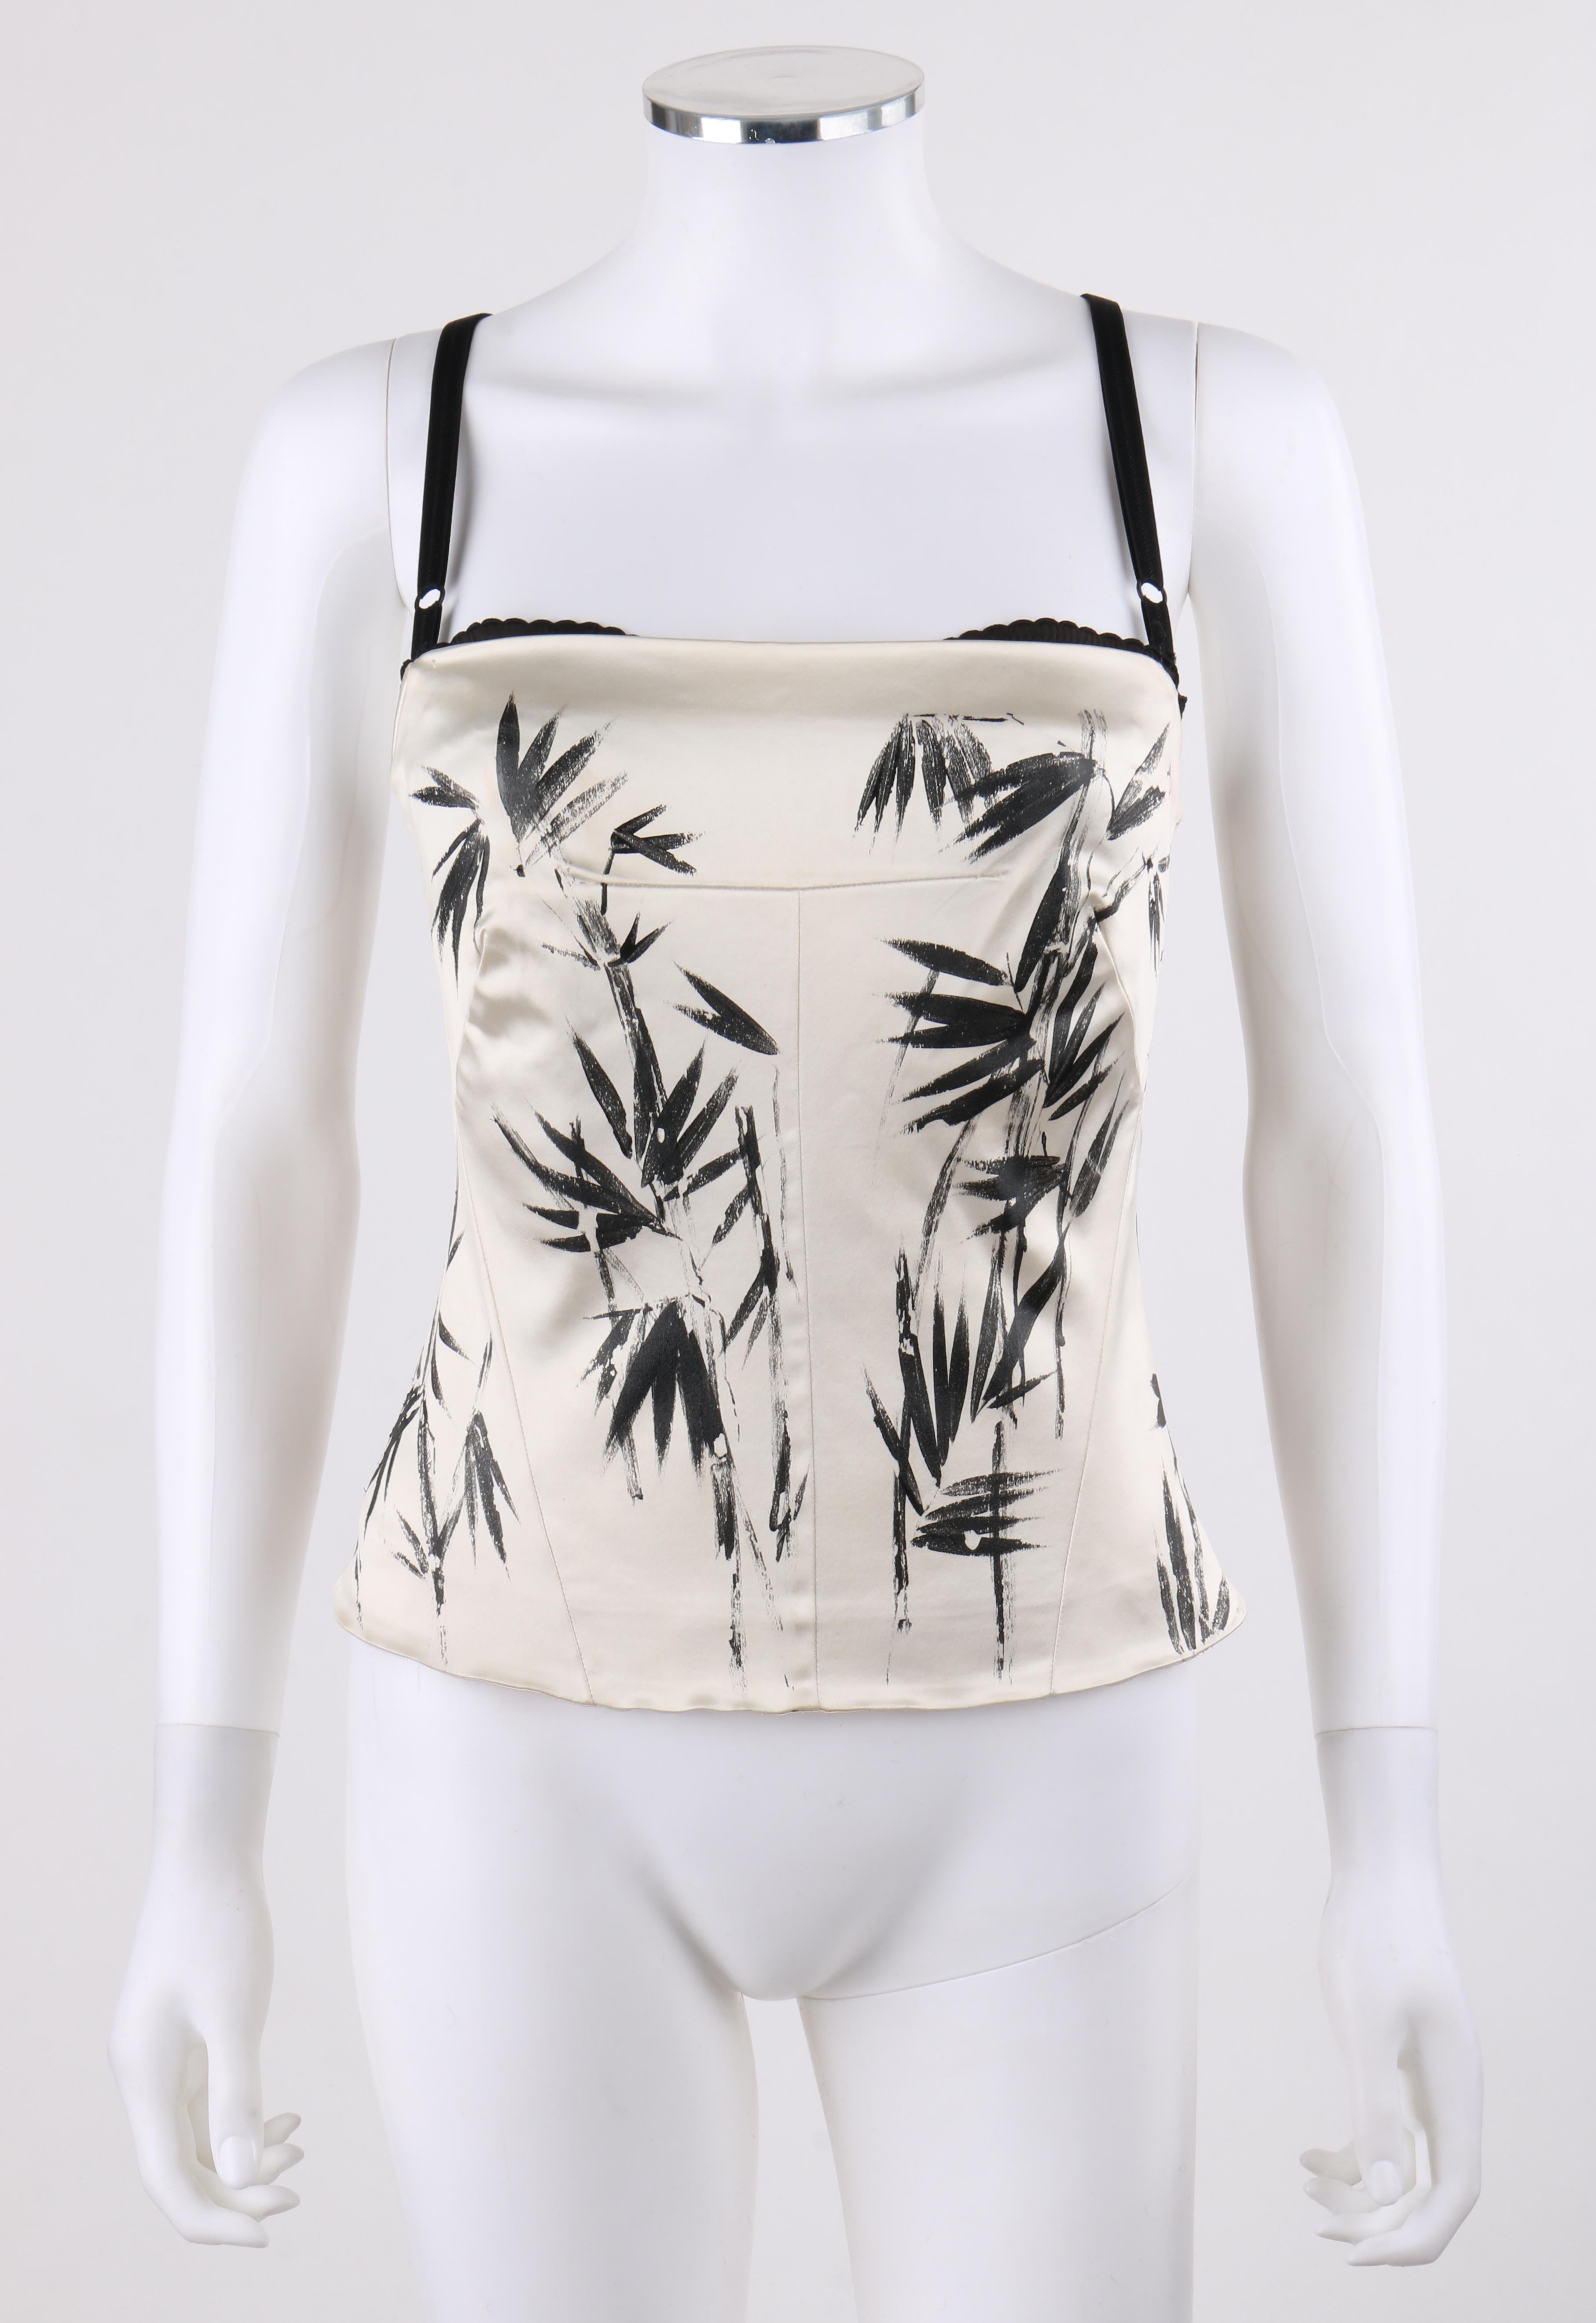 DOLCE & GABBANA c.2000’s Ivory Black Hand Painted Bamboo Leaf Corset Bustier Top
 
Brand / Manufacturer: Dolce & Gabbana 
Style: Corset, bustier top
Color(s): Shades of ivory and black
Lined: Yes       
Unmarked Fabric Content: Satin  
Additional